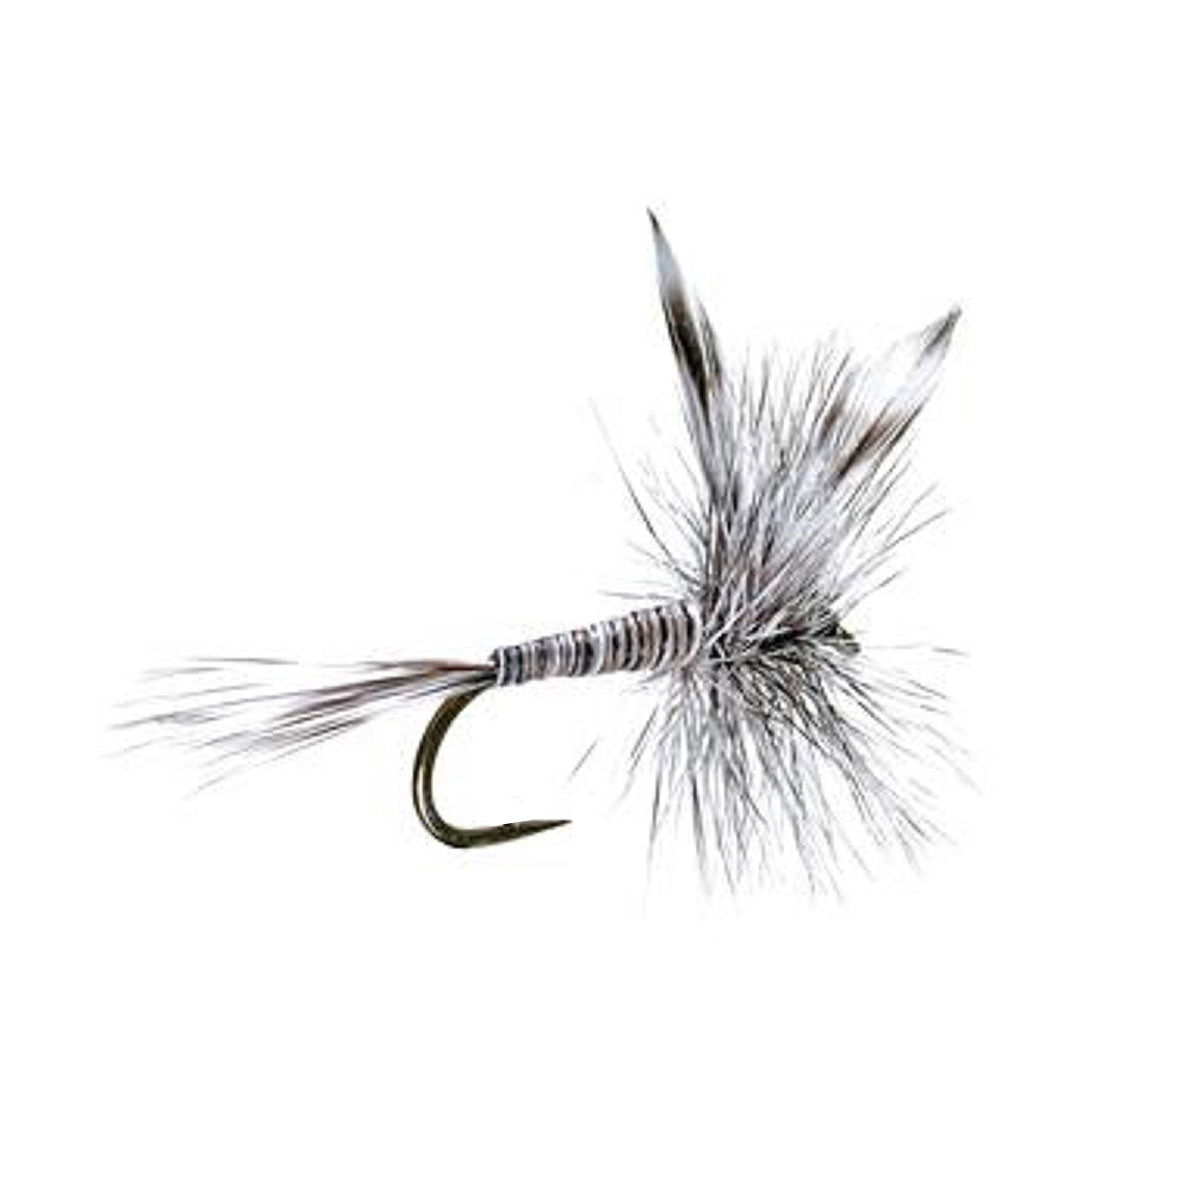 Barbless Mosquito Classic Trout Dry Fly Fishing 1 Dozen Flies - Hook Size 18